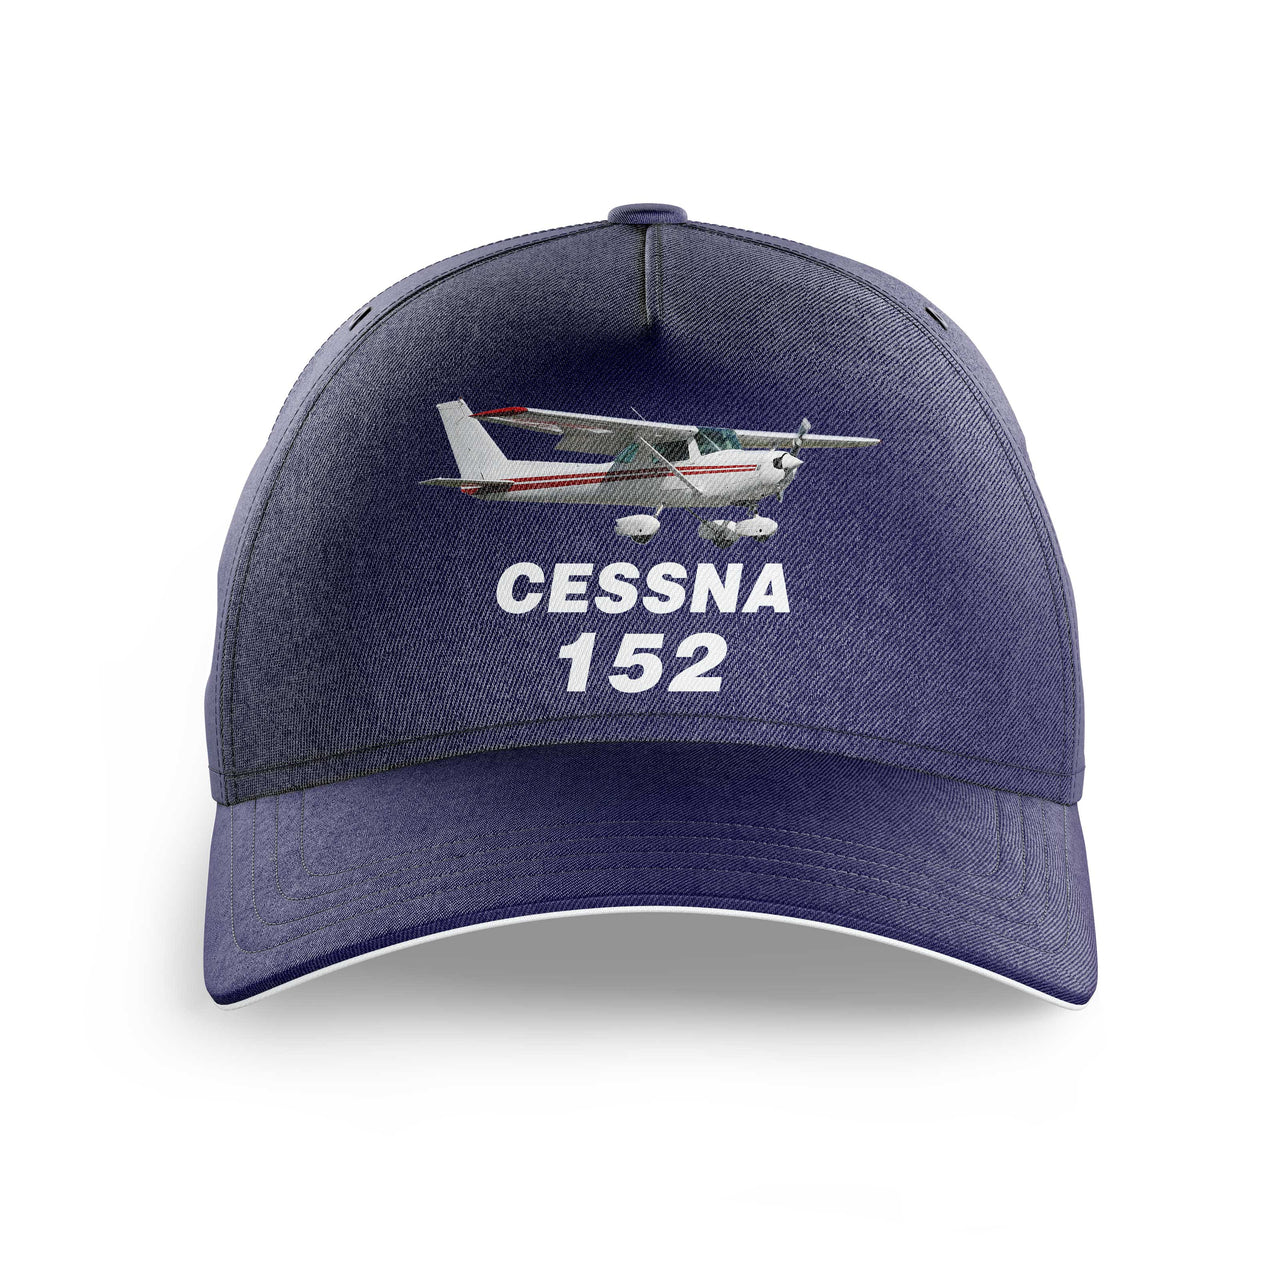 The Cessna 152 Printed Hats